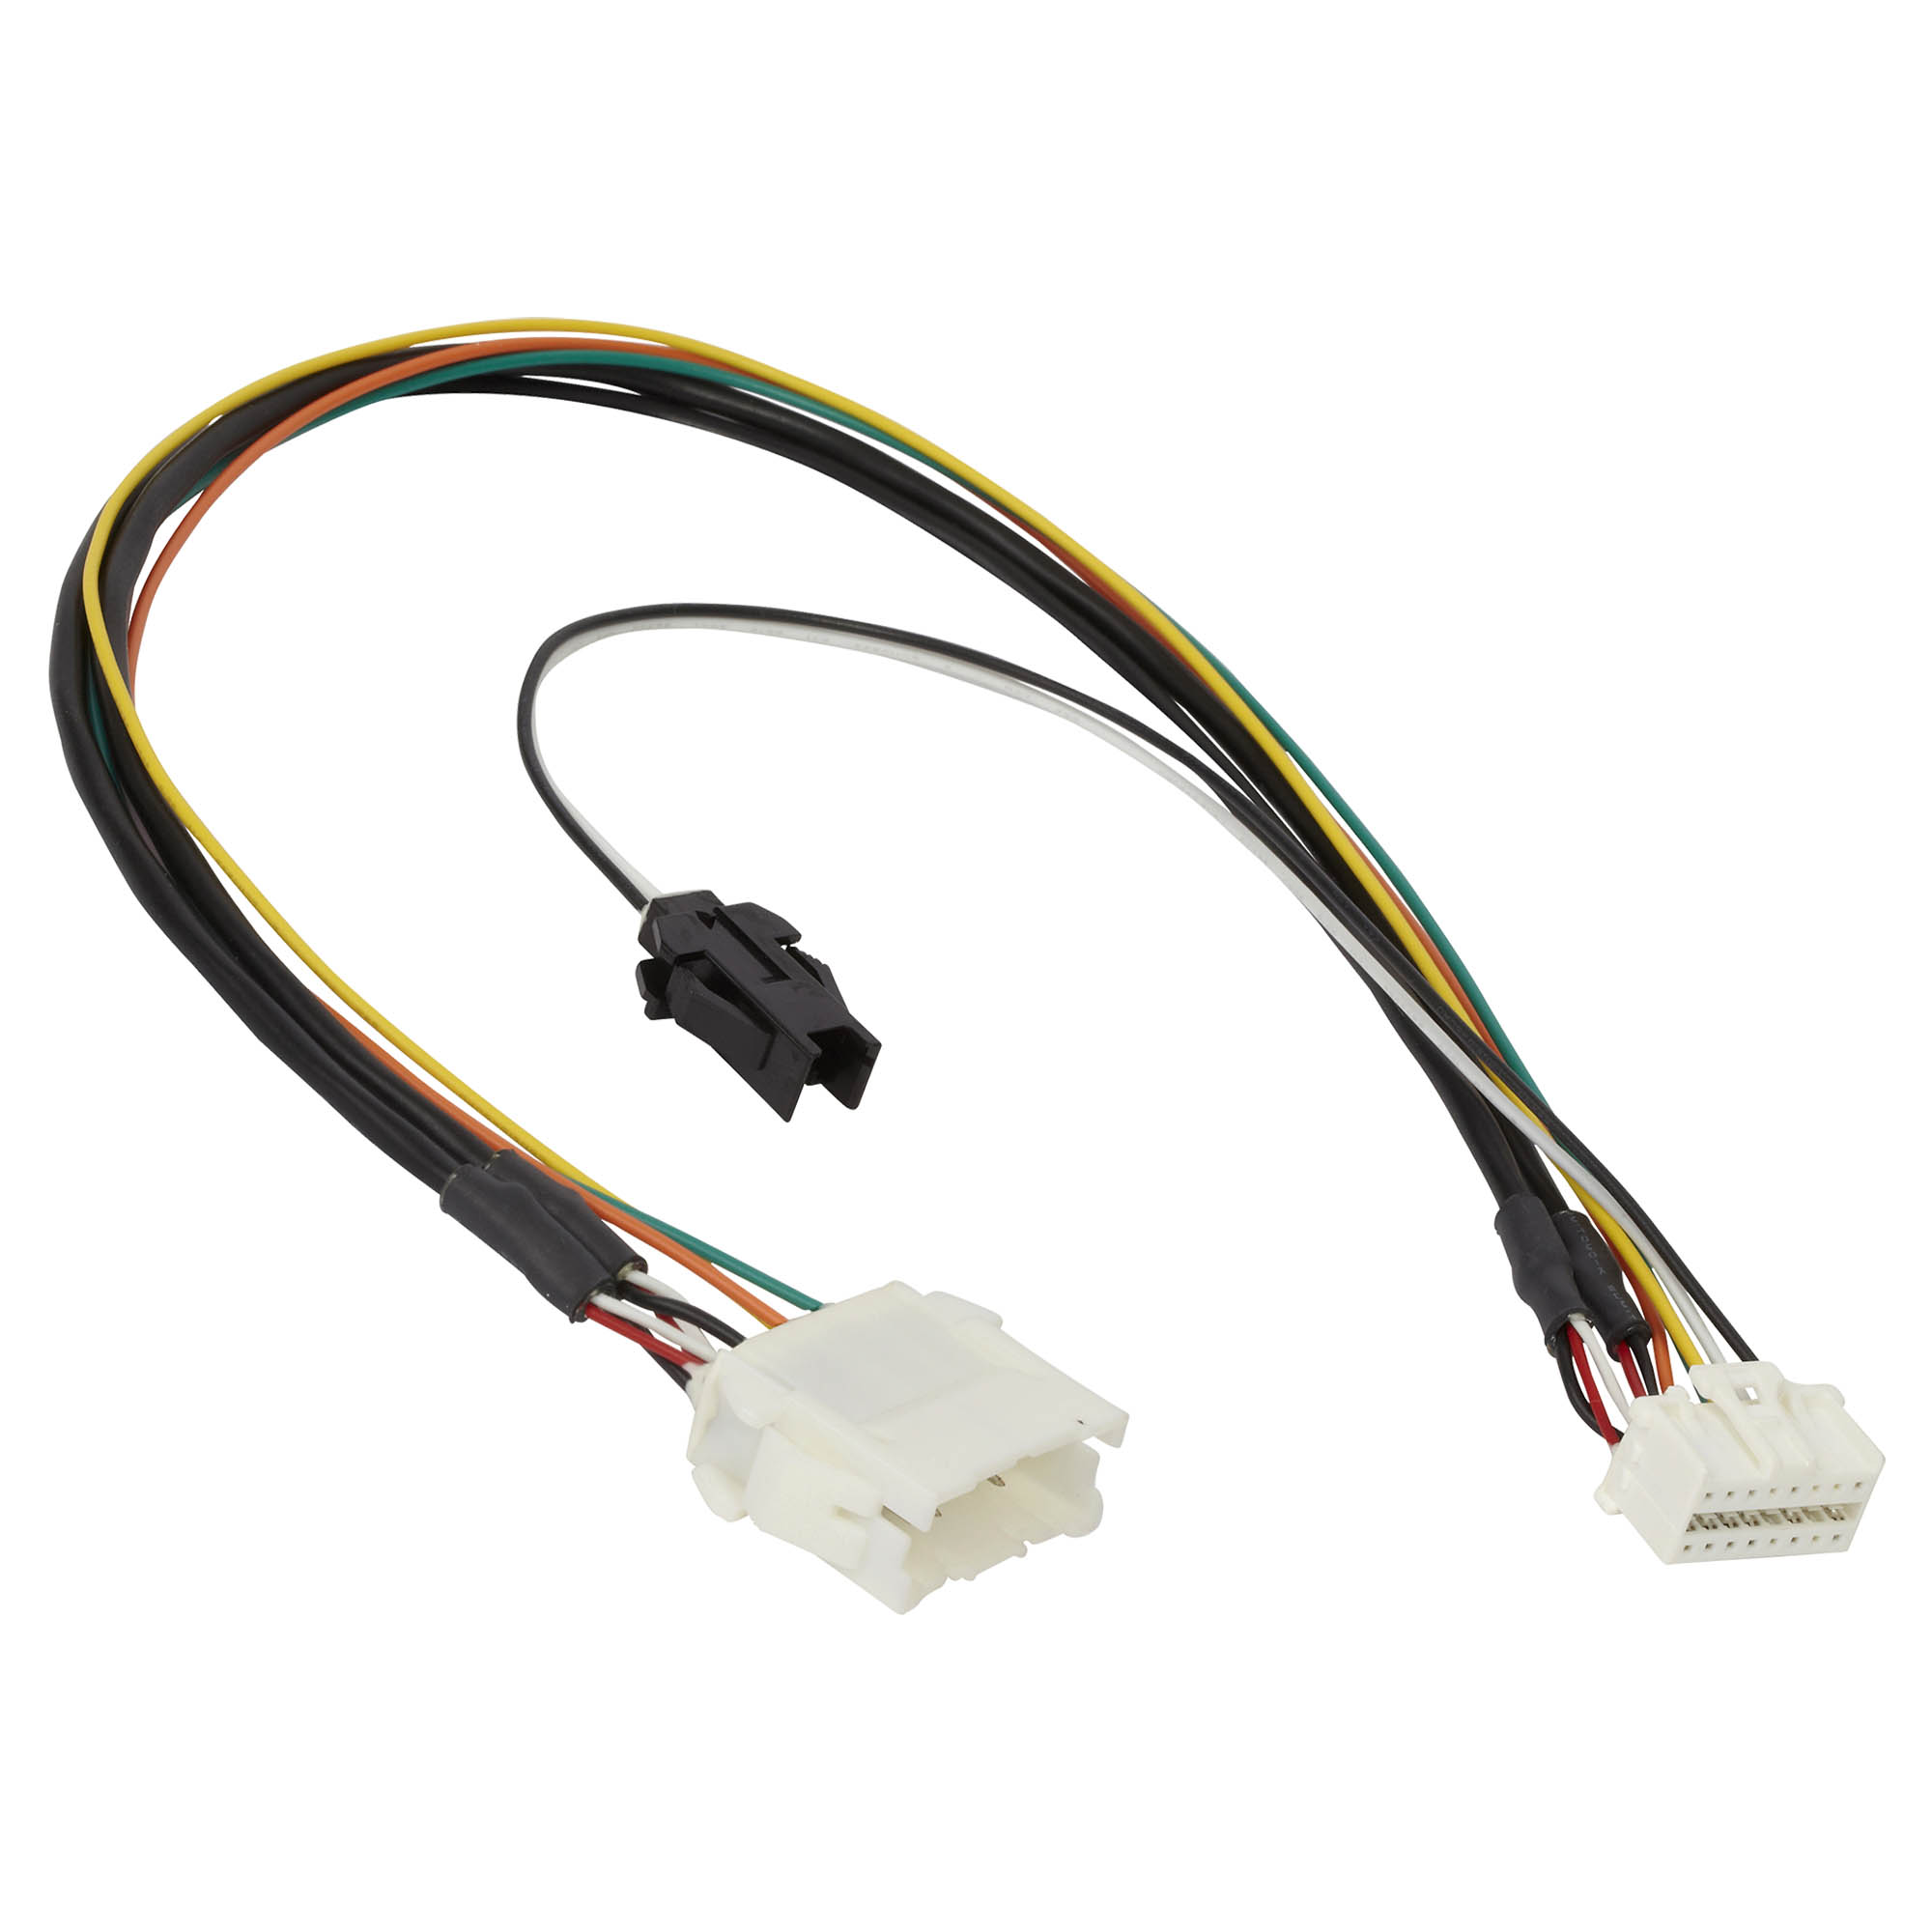 LOWER SENSOR/LED IND. RELAYHARNESS AT200